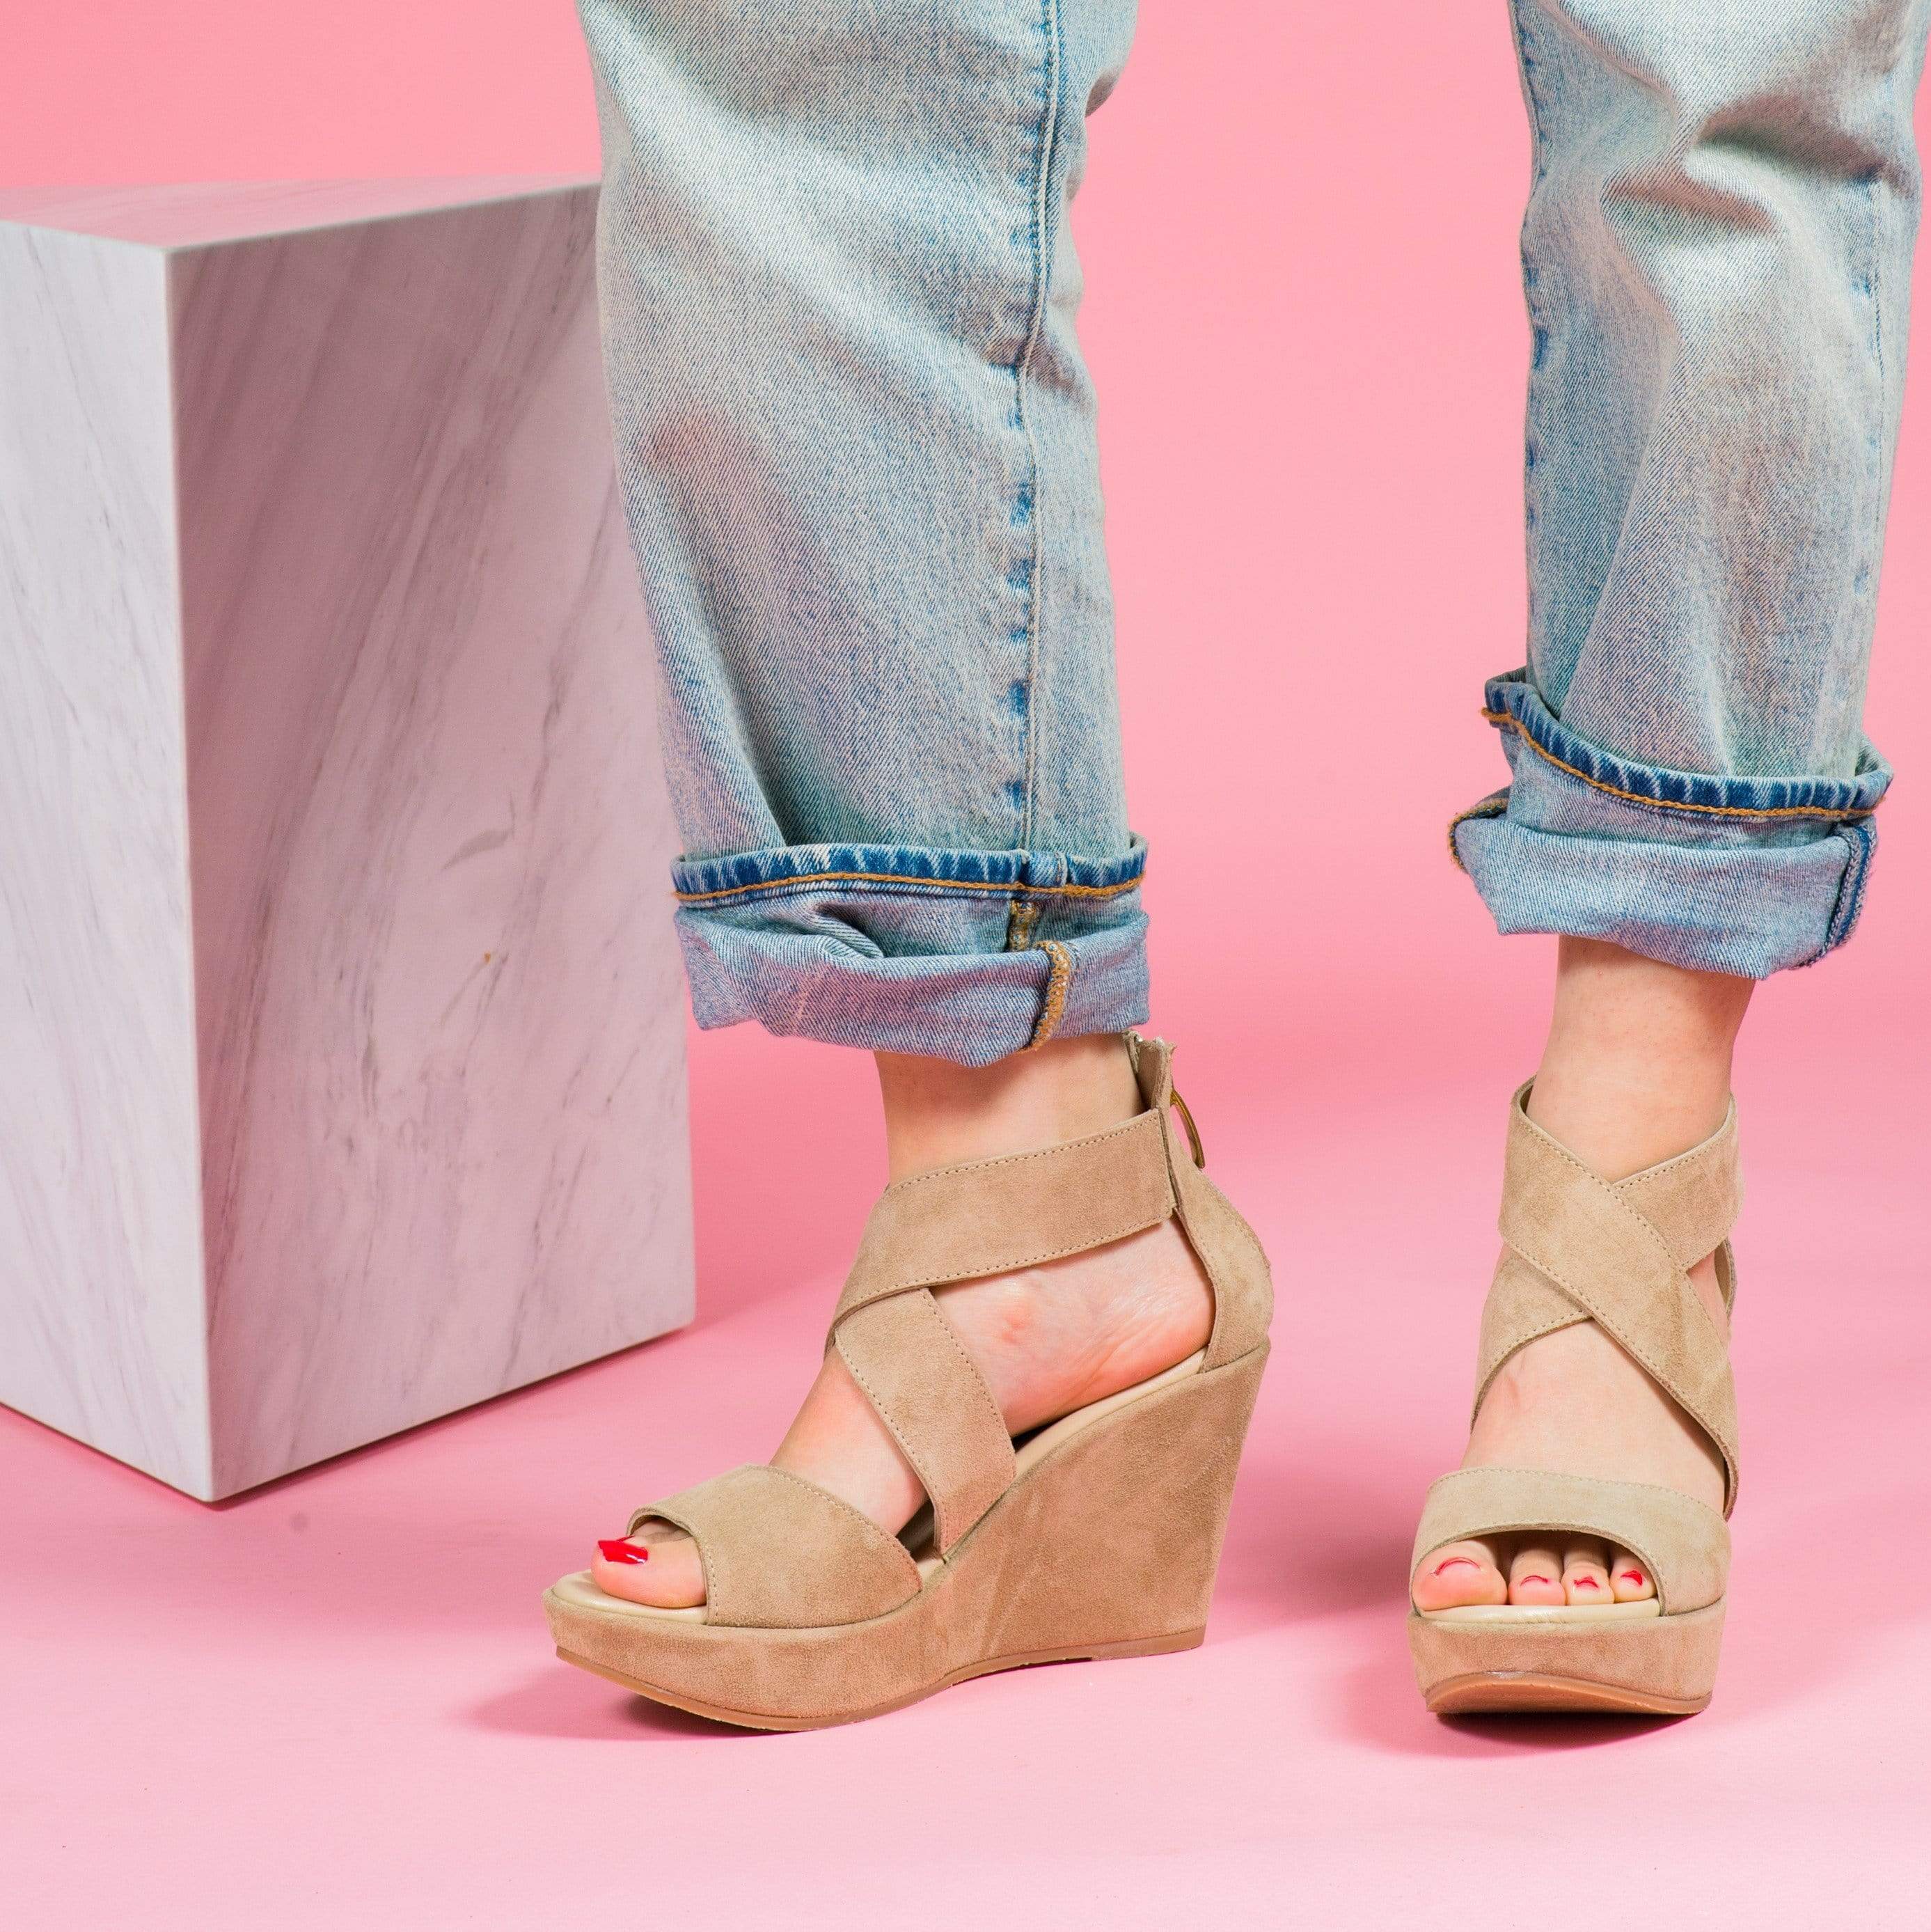 Hey, Mom! Five Reasons You Deserve That New Pair of Shoes